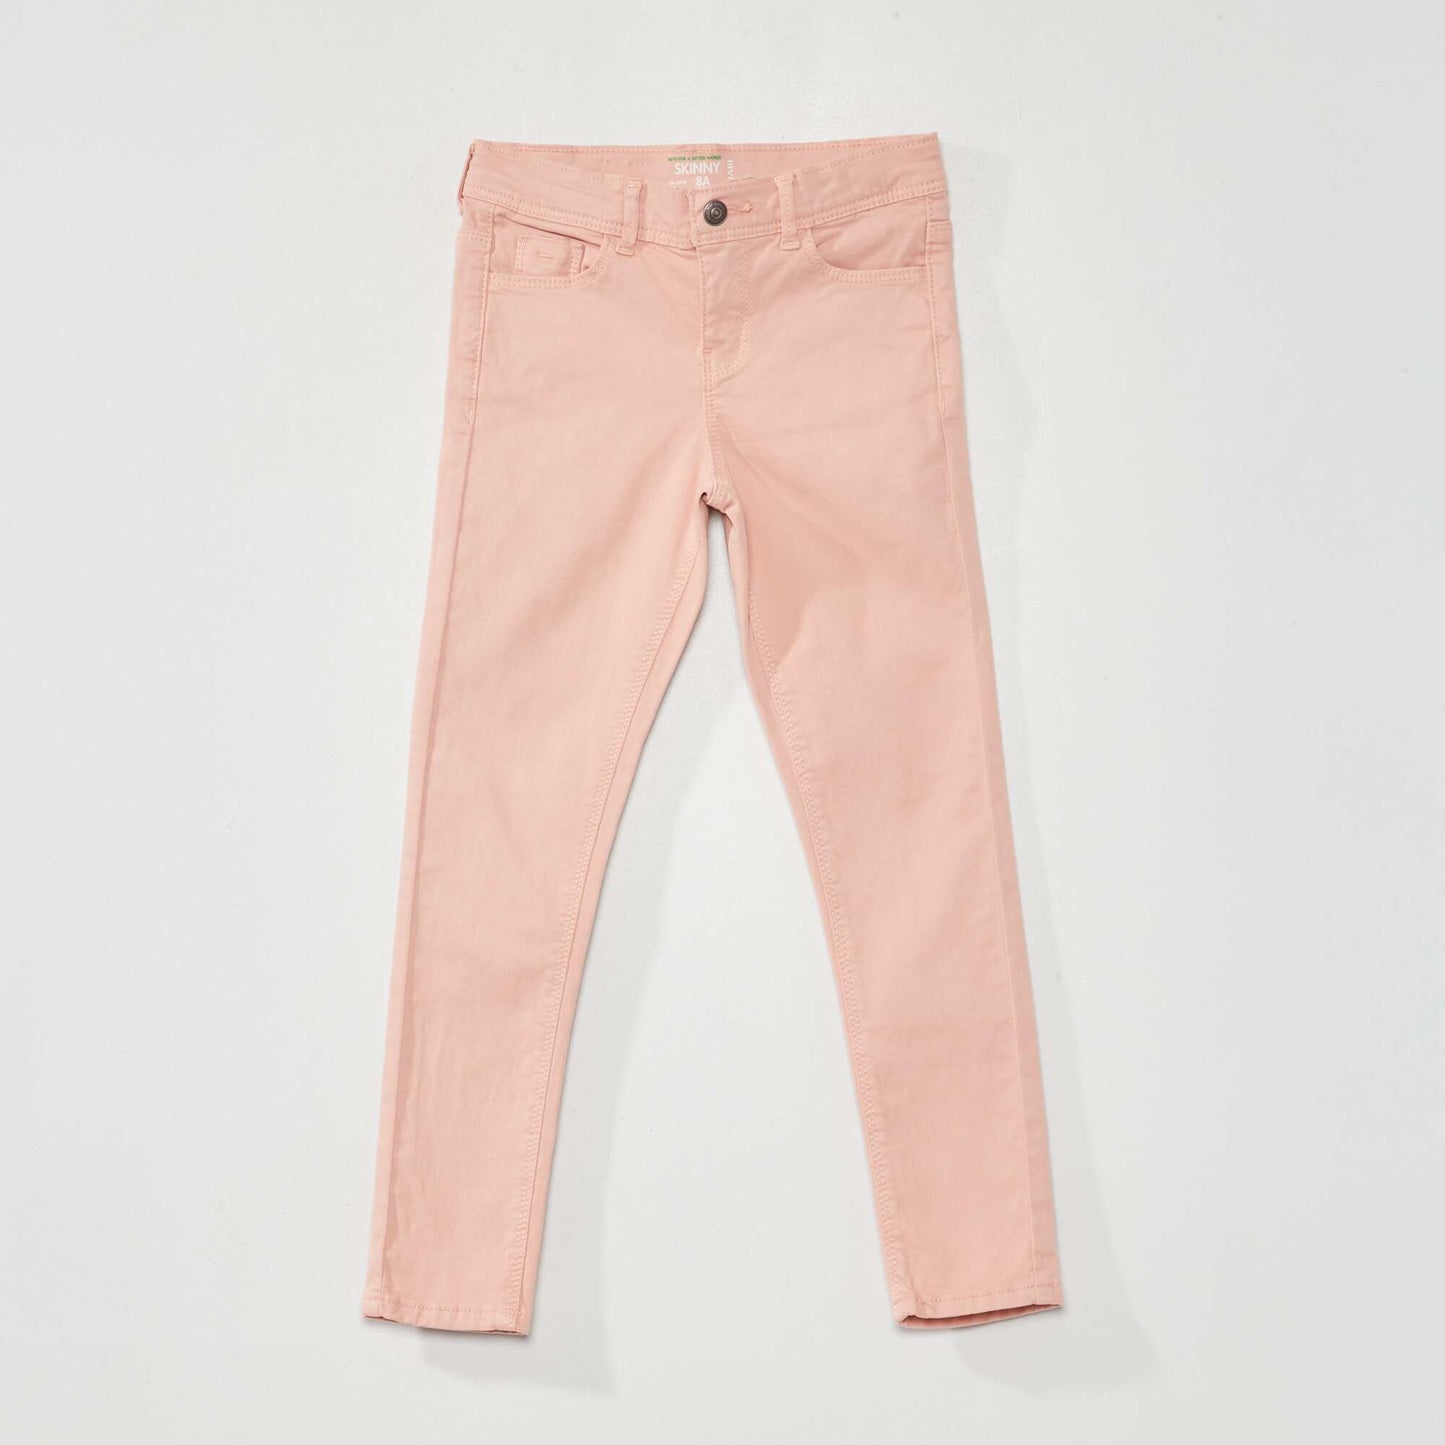 Skinny trousers pink